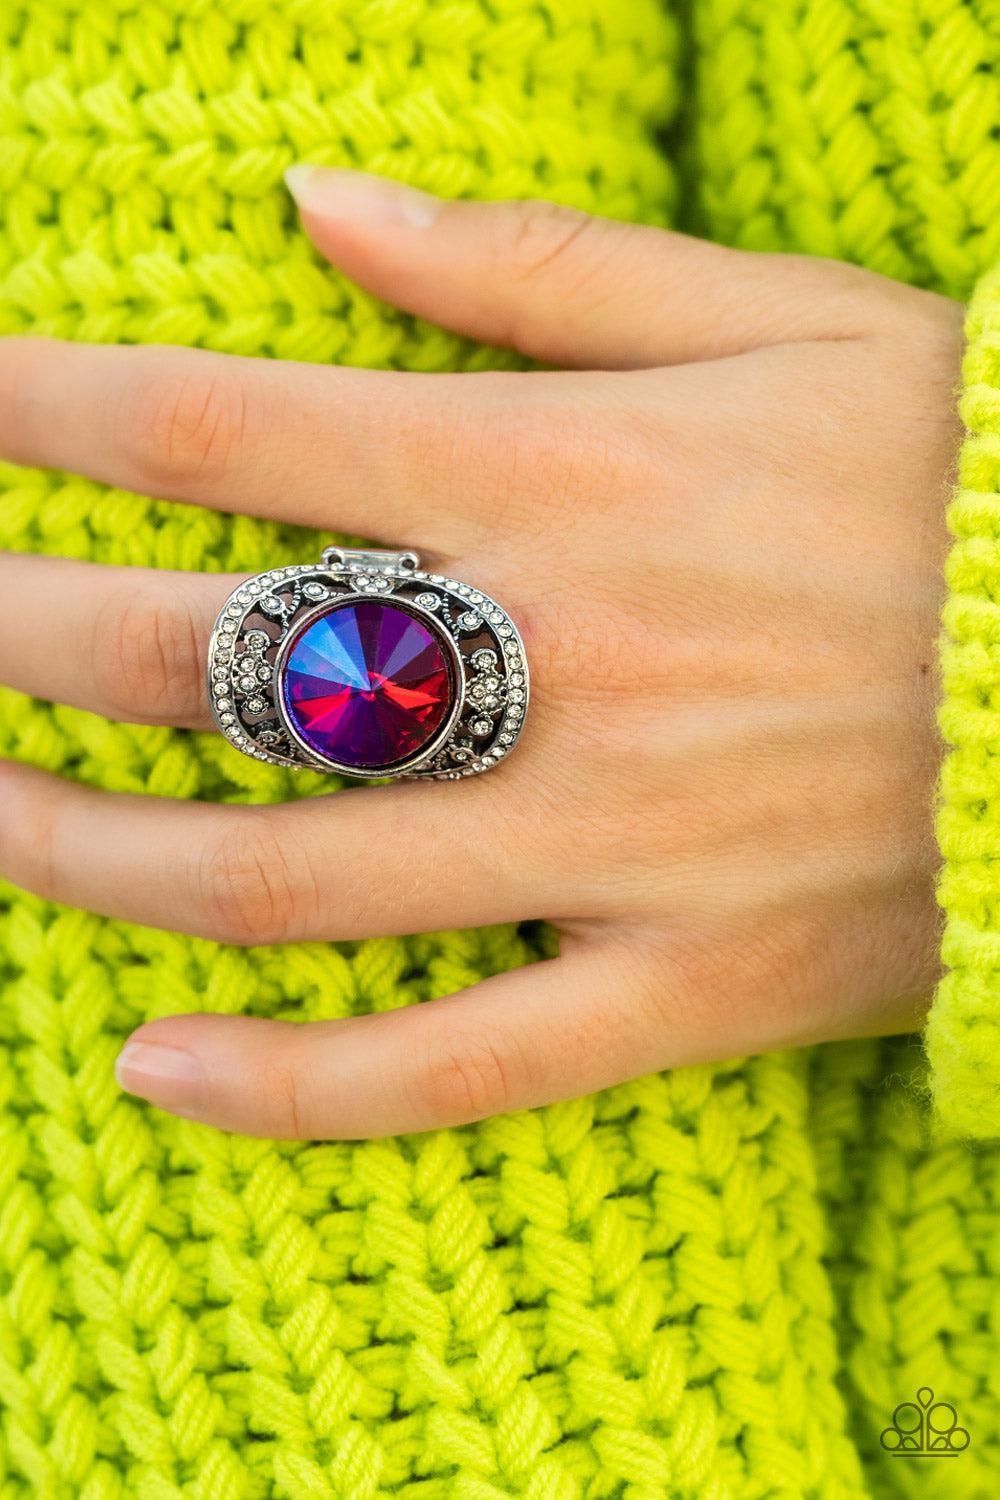 Galactic Garden Pink Opalescent Gem Ring - Paparazzi Accessories- lightbox - CarasShop.com - $5 Jewelry by Cara Jewels